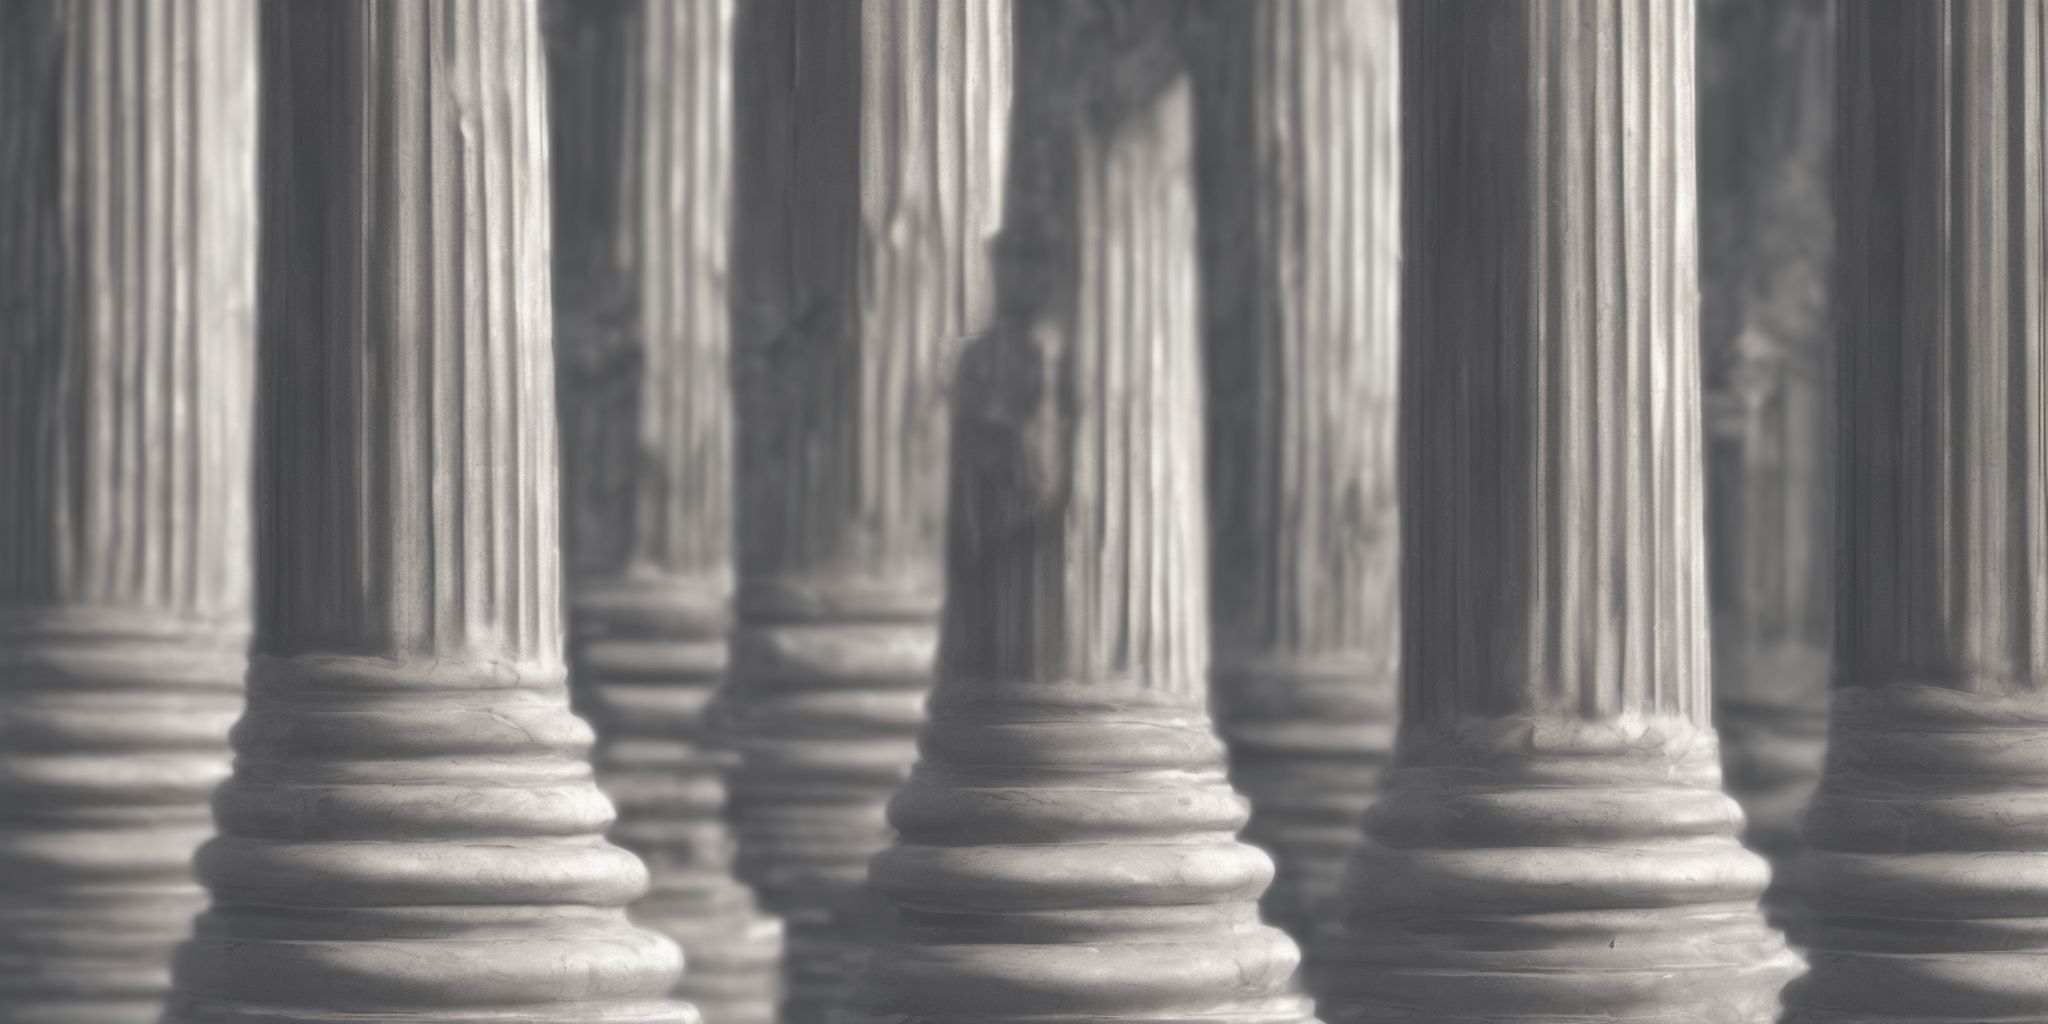 Pillar  in realistic, photographic style